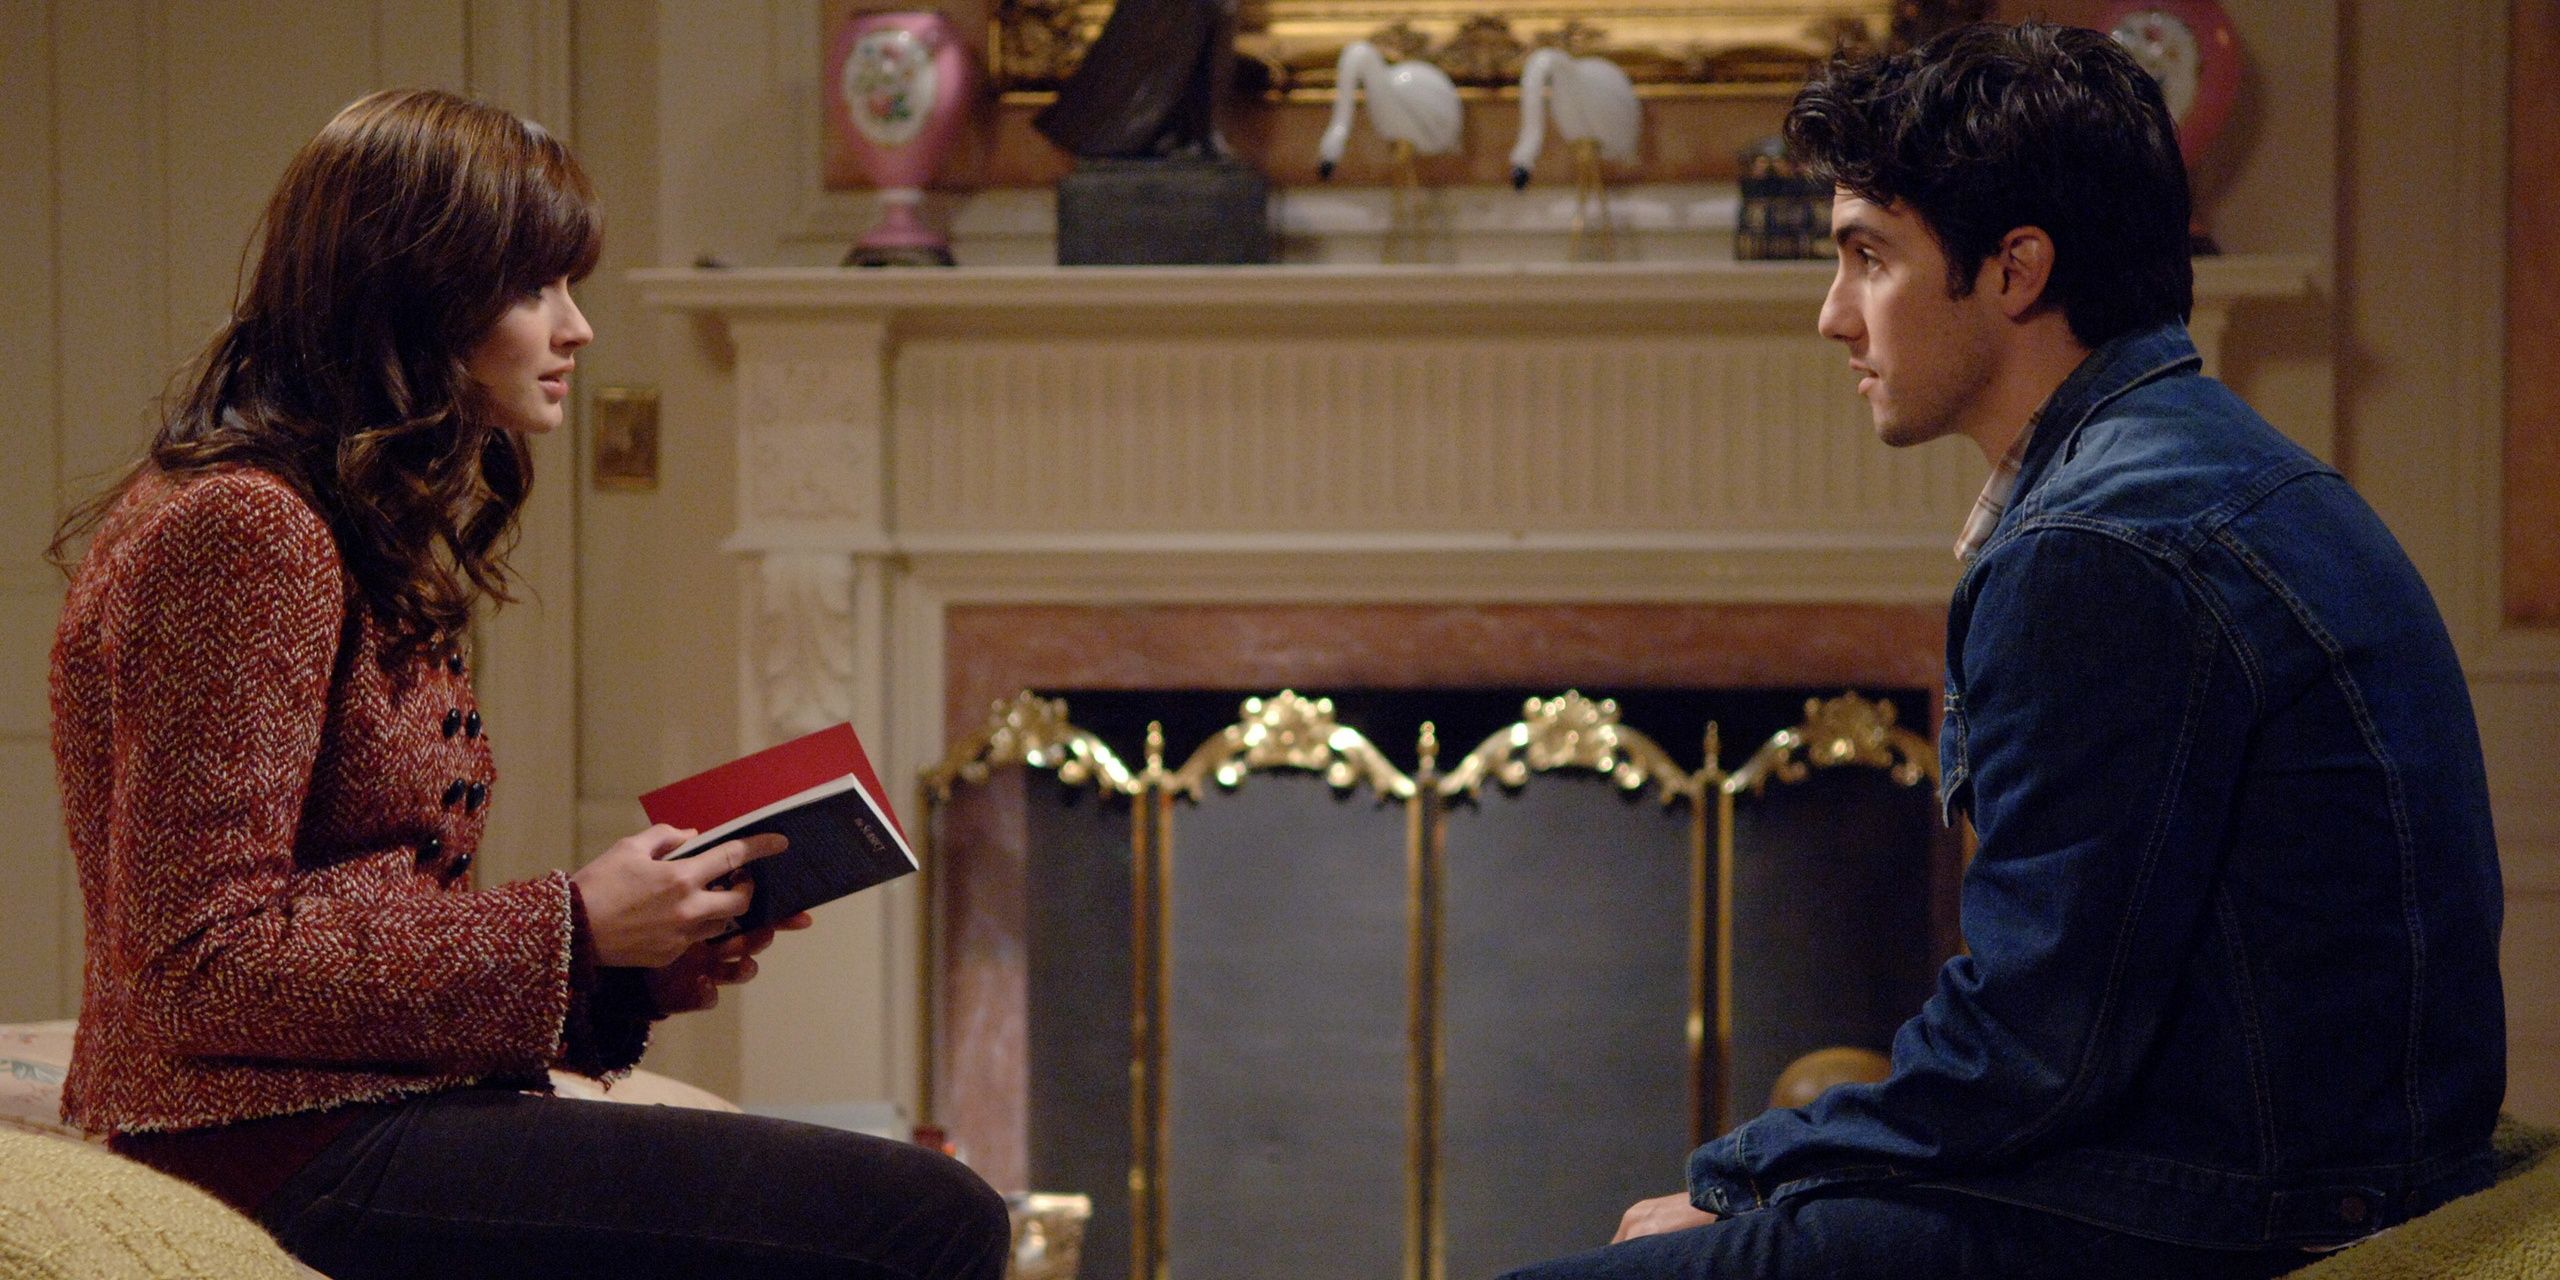 Rory and Jess sit in front of a fireplace and talk in Gilmore Girls season 6